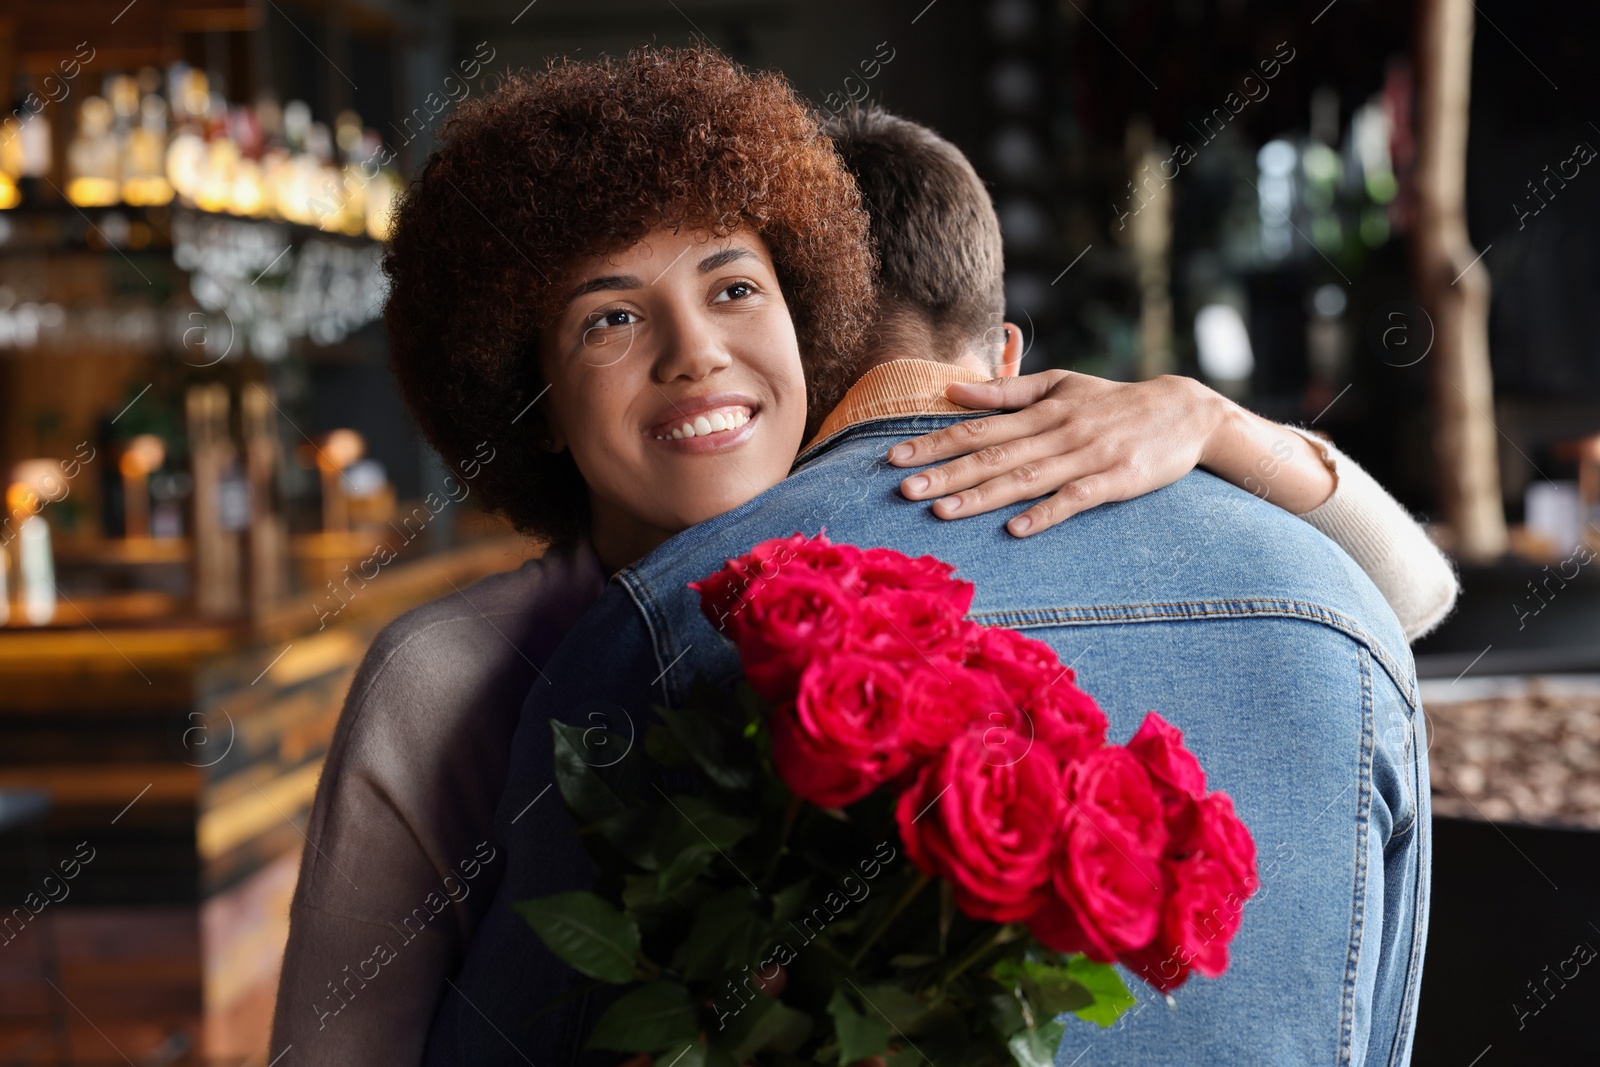 Photo of International dating. Beautiful woman with bouquet of roses hugging her boyfriend in cafe